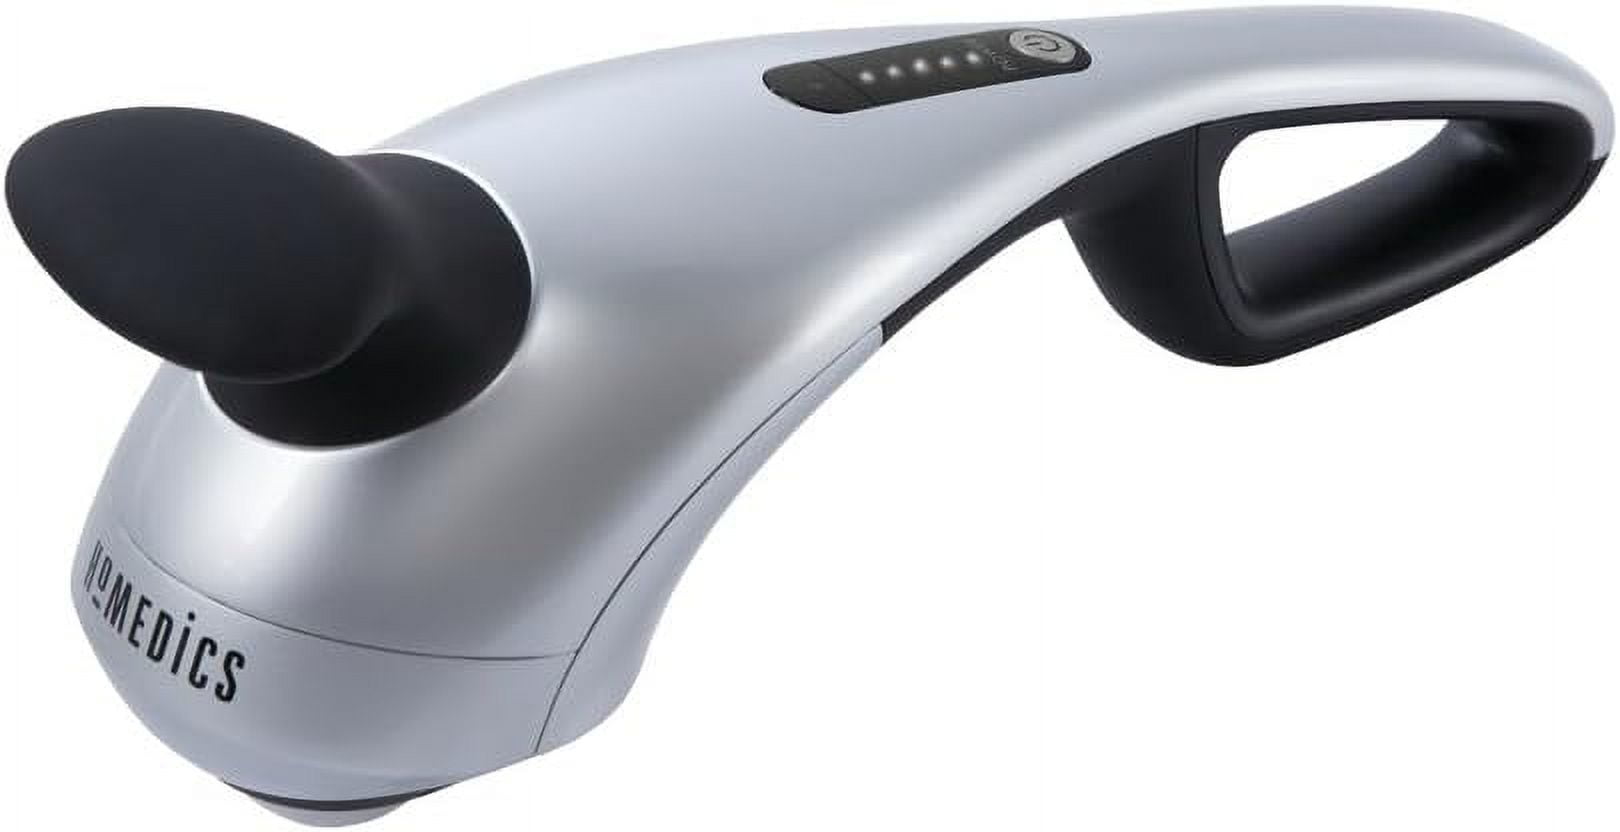 Homedics, Cordless Percussion Body Massager with Soothing Heat Lightweight,  Handheld, Ergonomic with…See more Homedics, Cordless Percussion Body